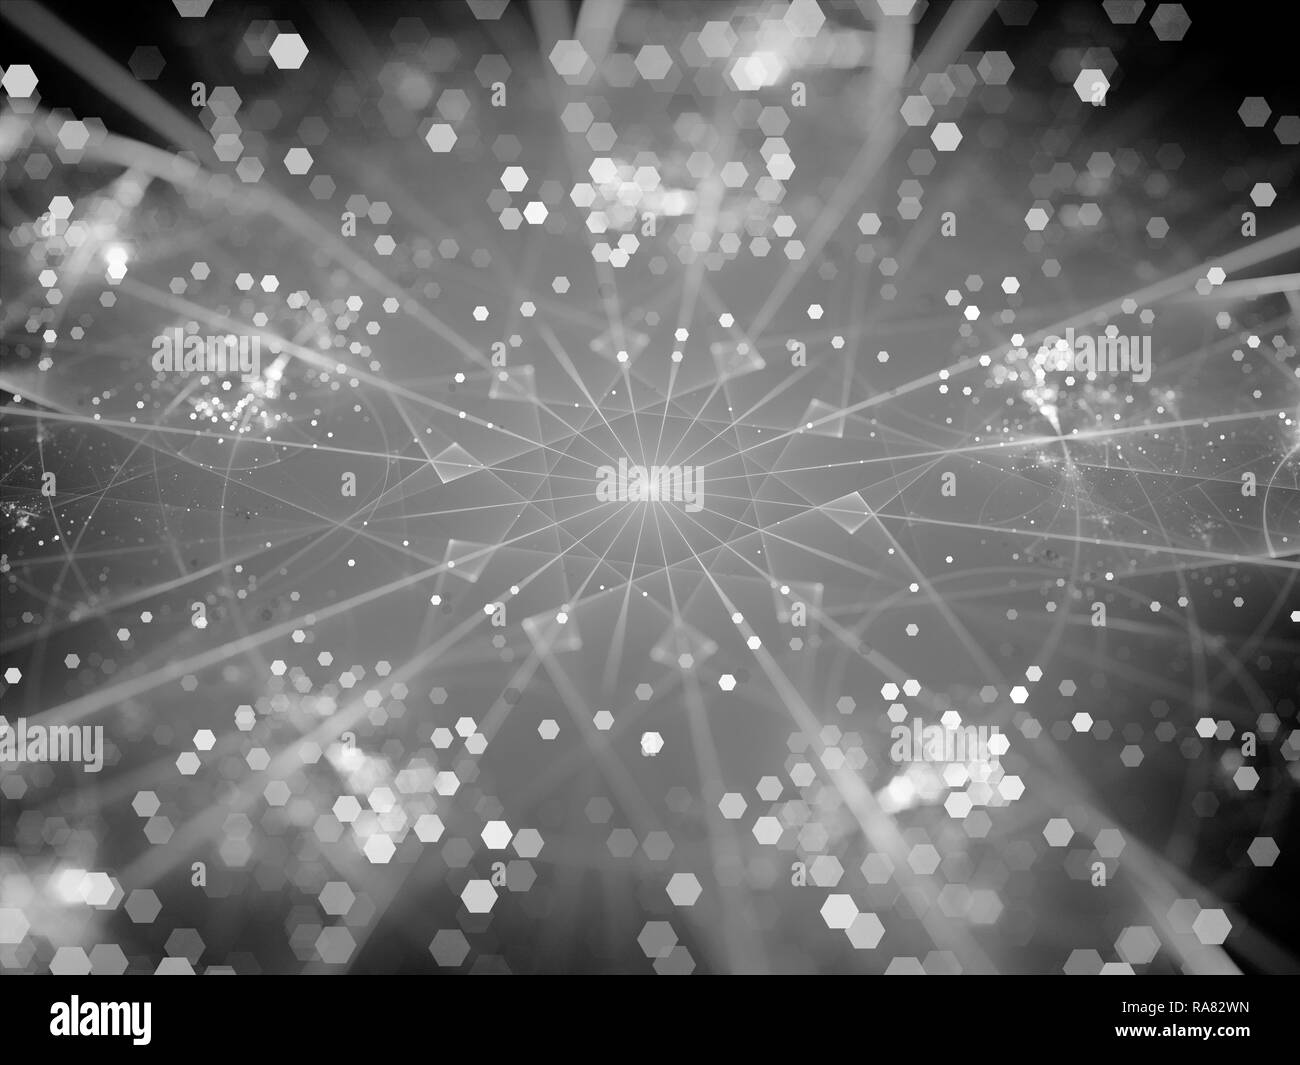 Glowing glowing big data hubs , network theory, computer generated abstract intensity map, black and white, 3D rendering Stock Photo